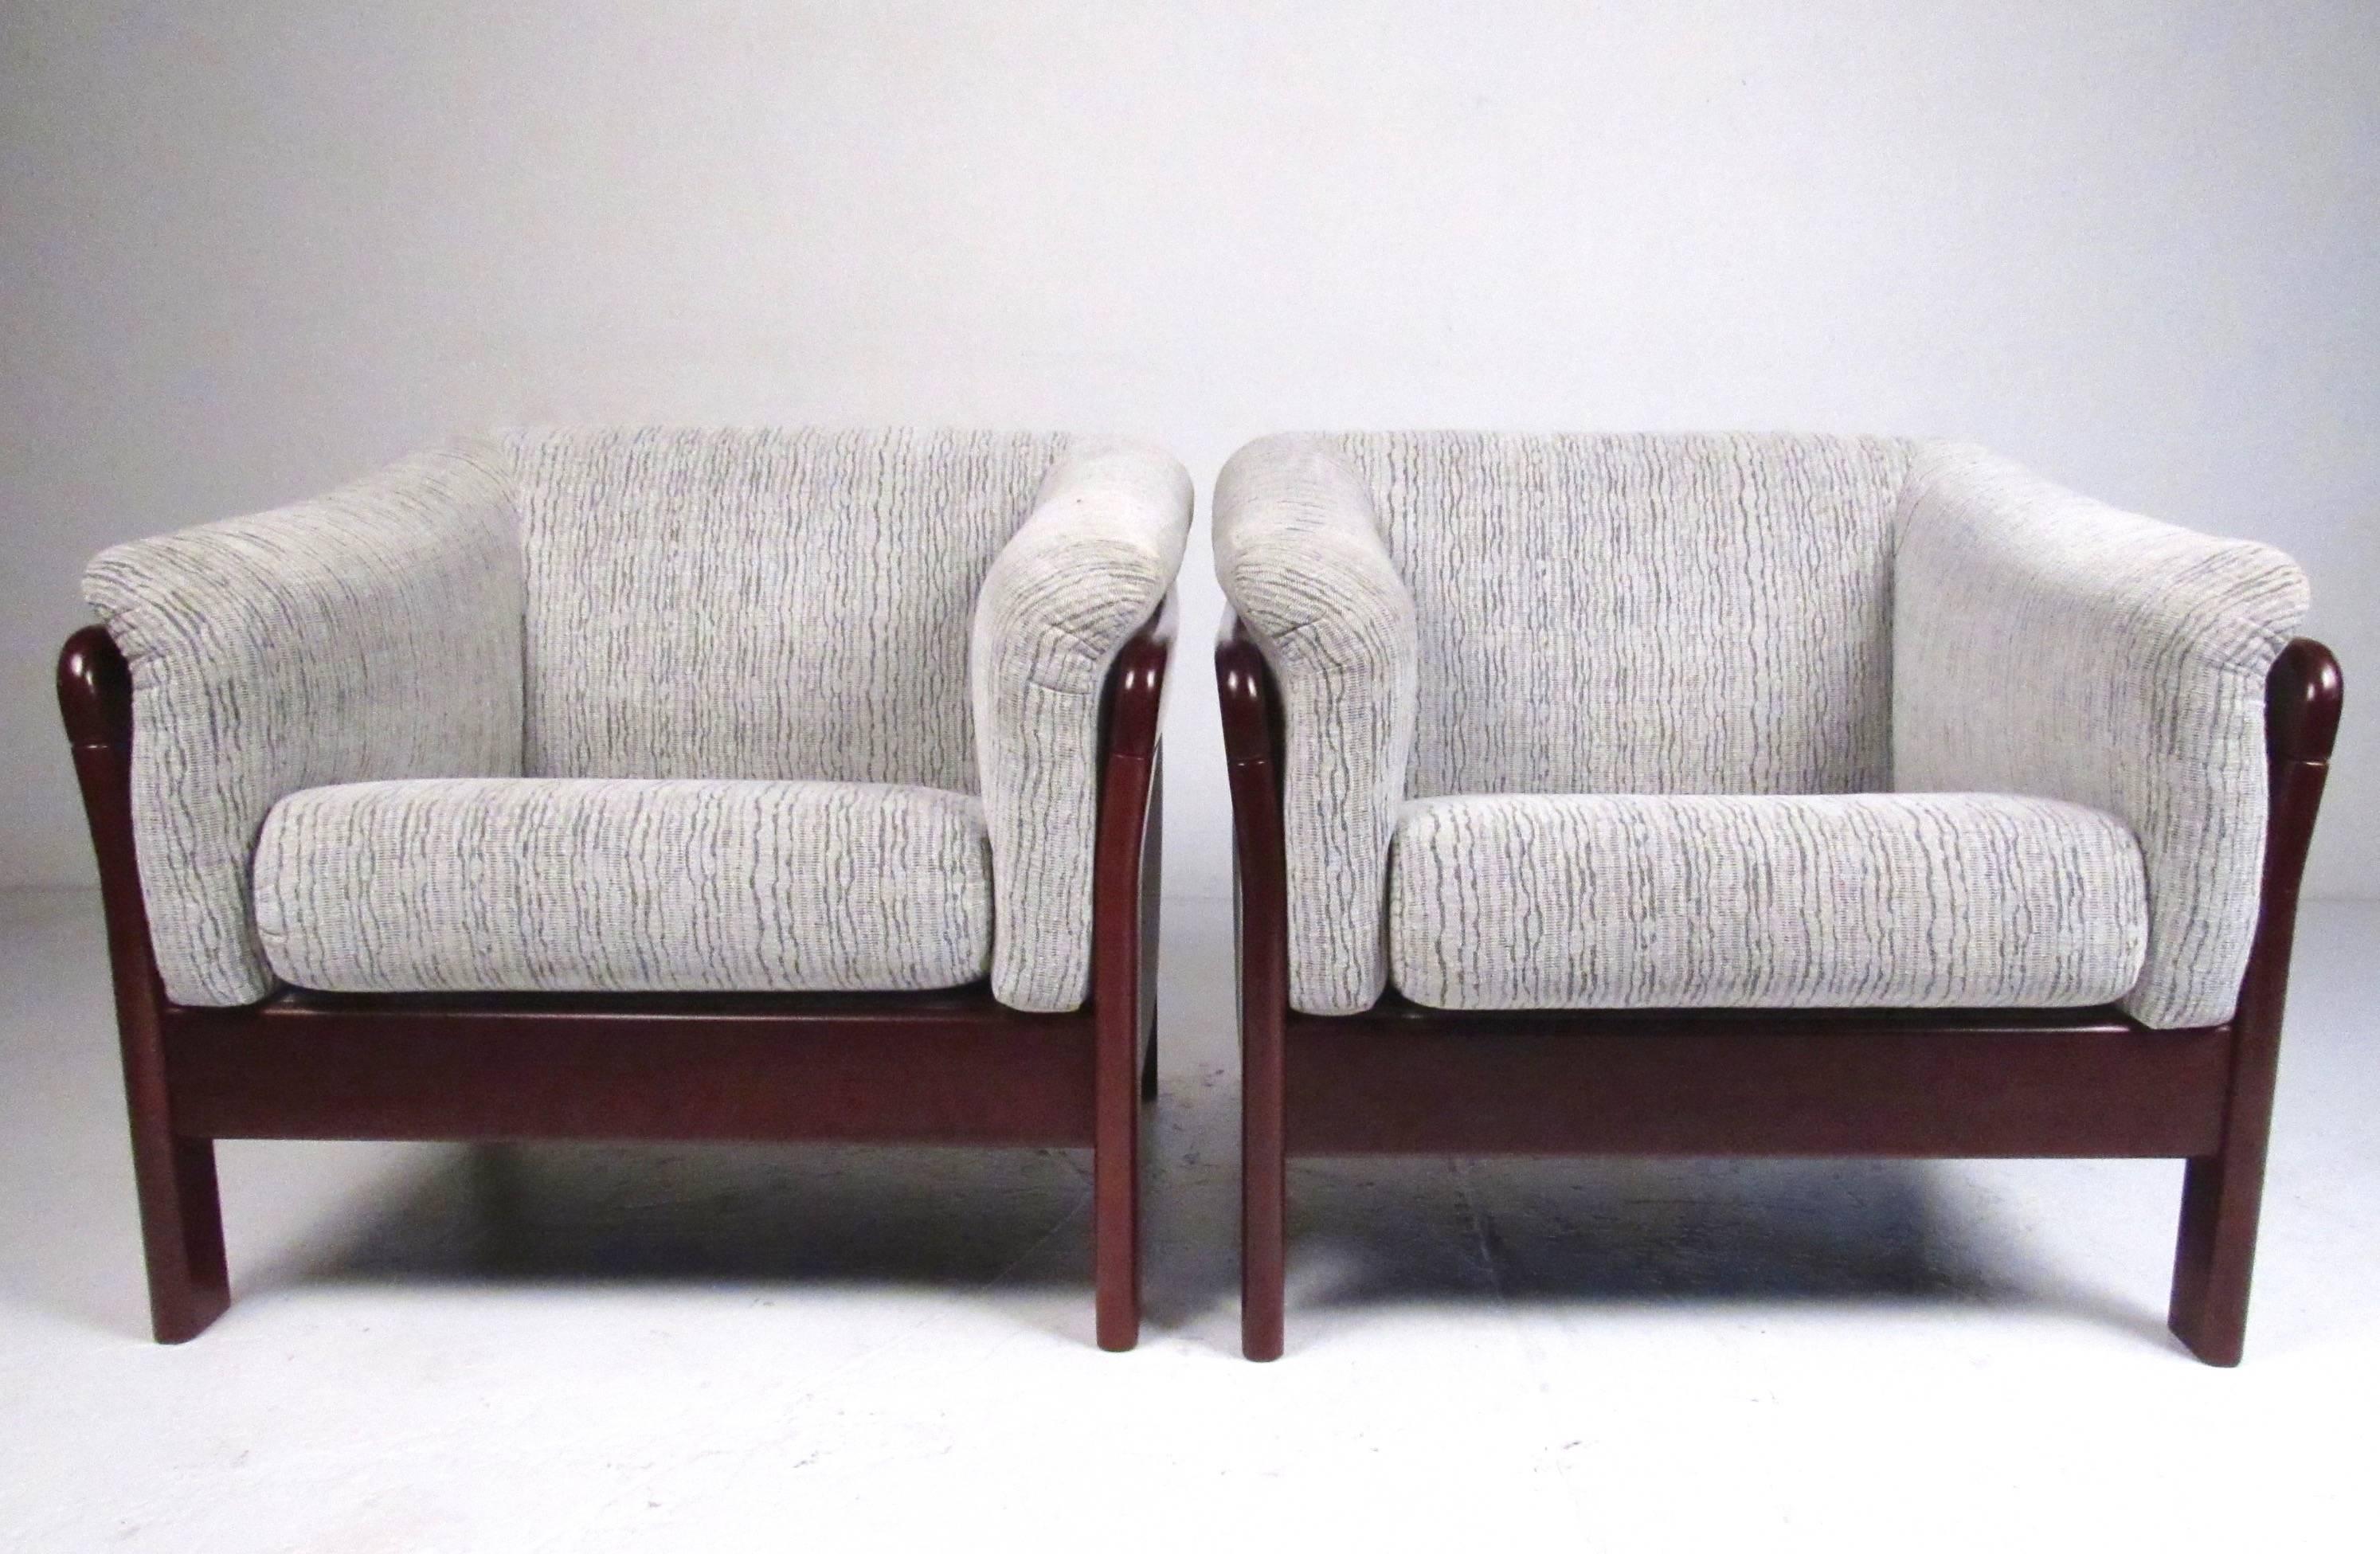 This comfortable pair of contemporary modern lounge chairs make a stylish addition to any home or business seating area. Clean lines, plush upholstery, and rich wood finish add to the appeal of the matching chair. Please confirm item location (NY or